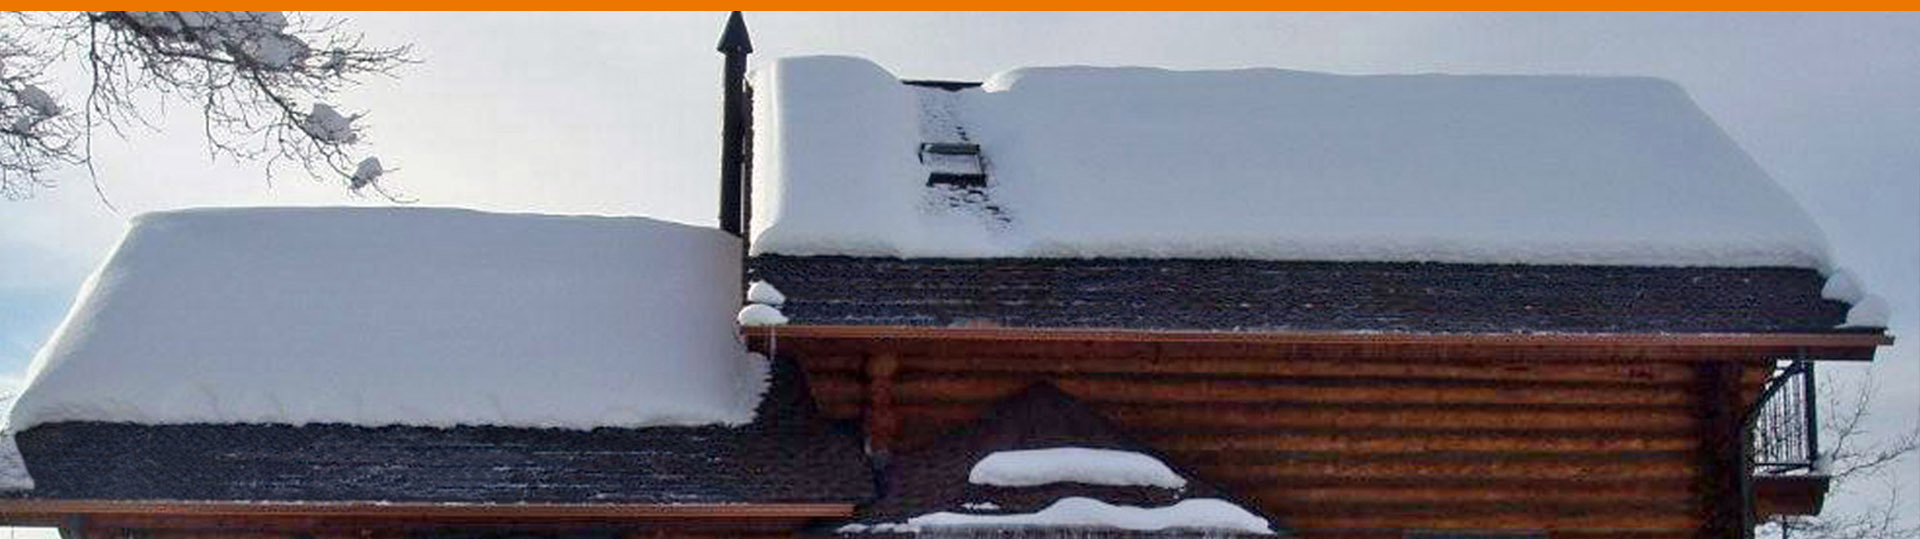 Best roof de-icing systems